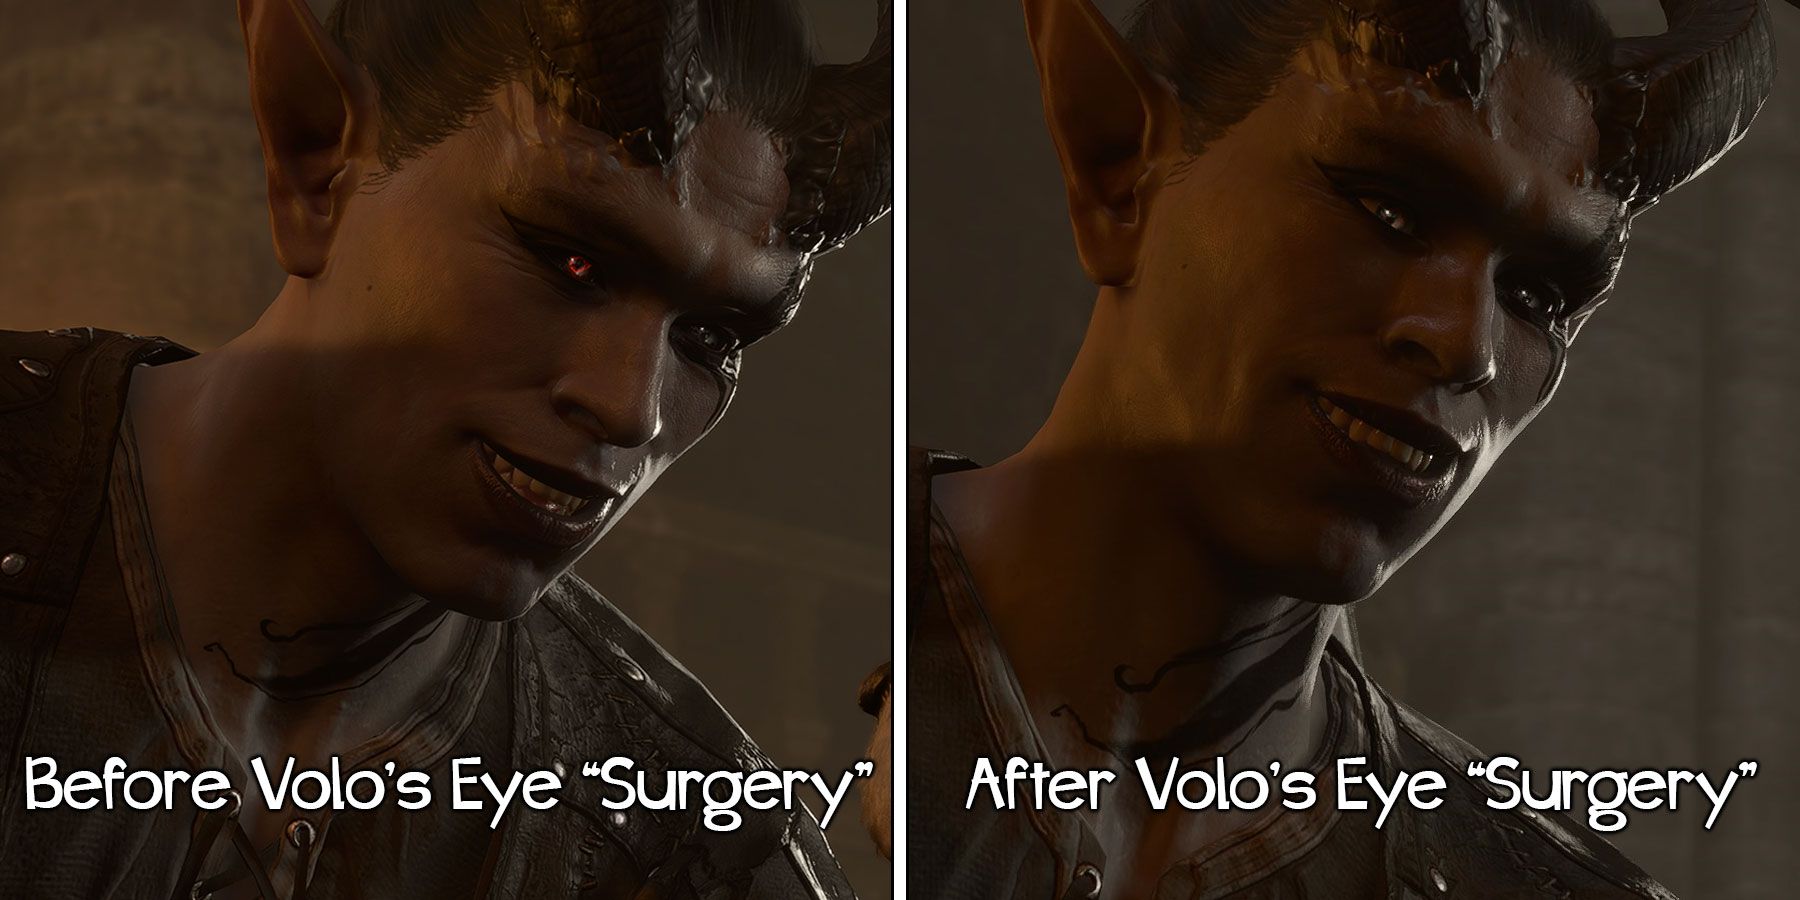 Volo's eye surgery before and after in Baldur's Gate 3.